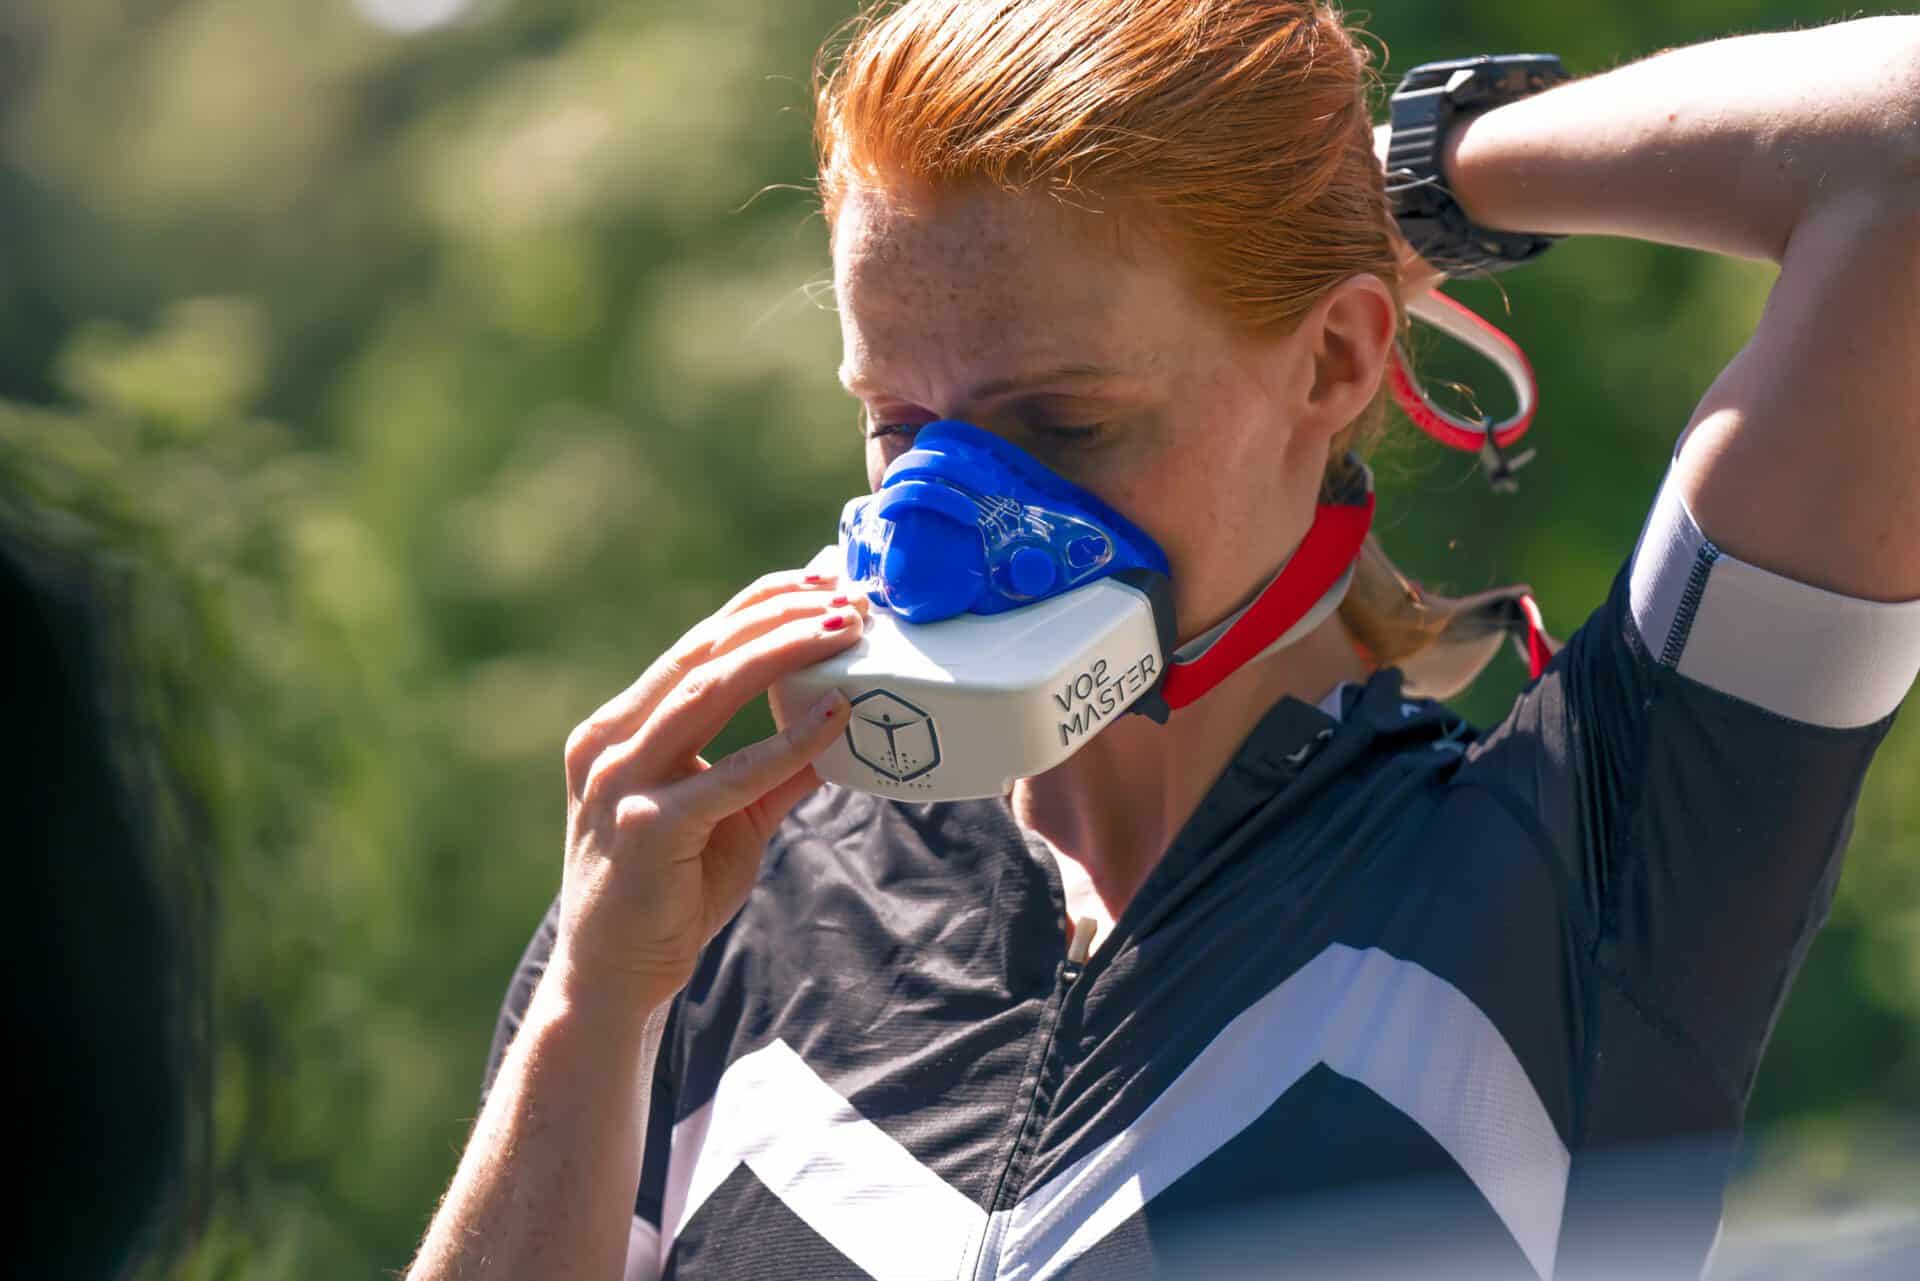 Woman strapping on the VO2 Master analyzer and blue Hans Rudolph mask outdoors